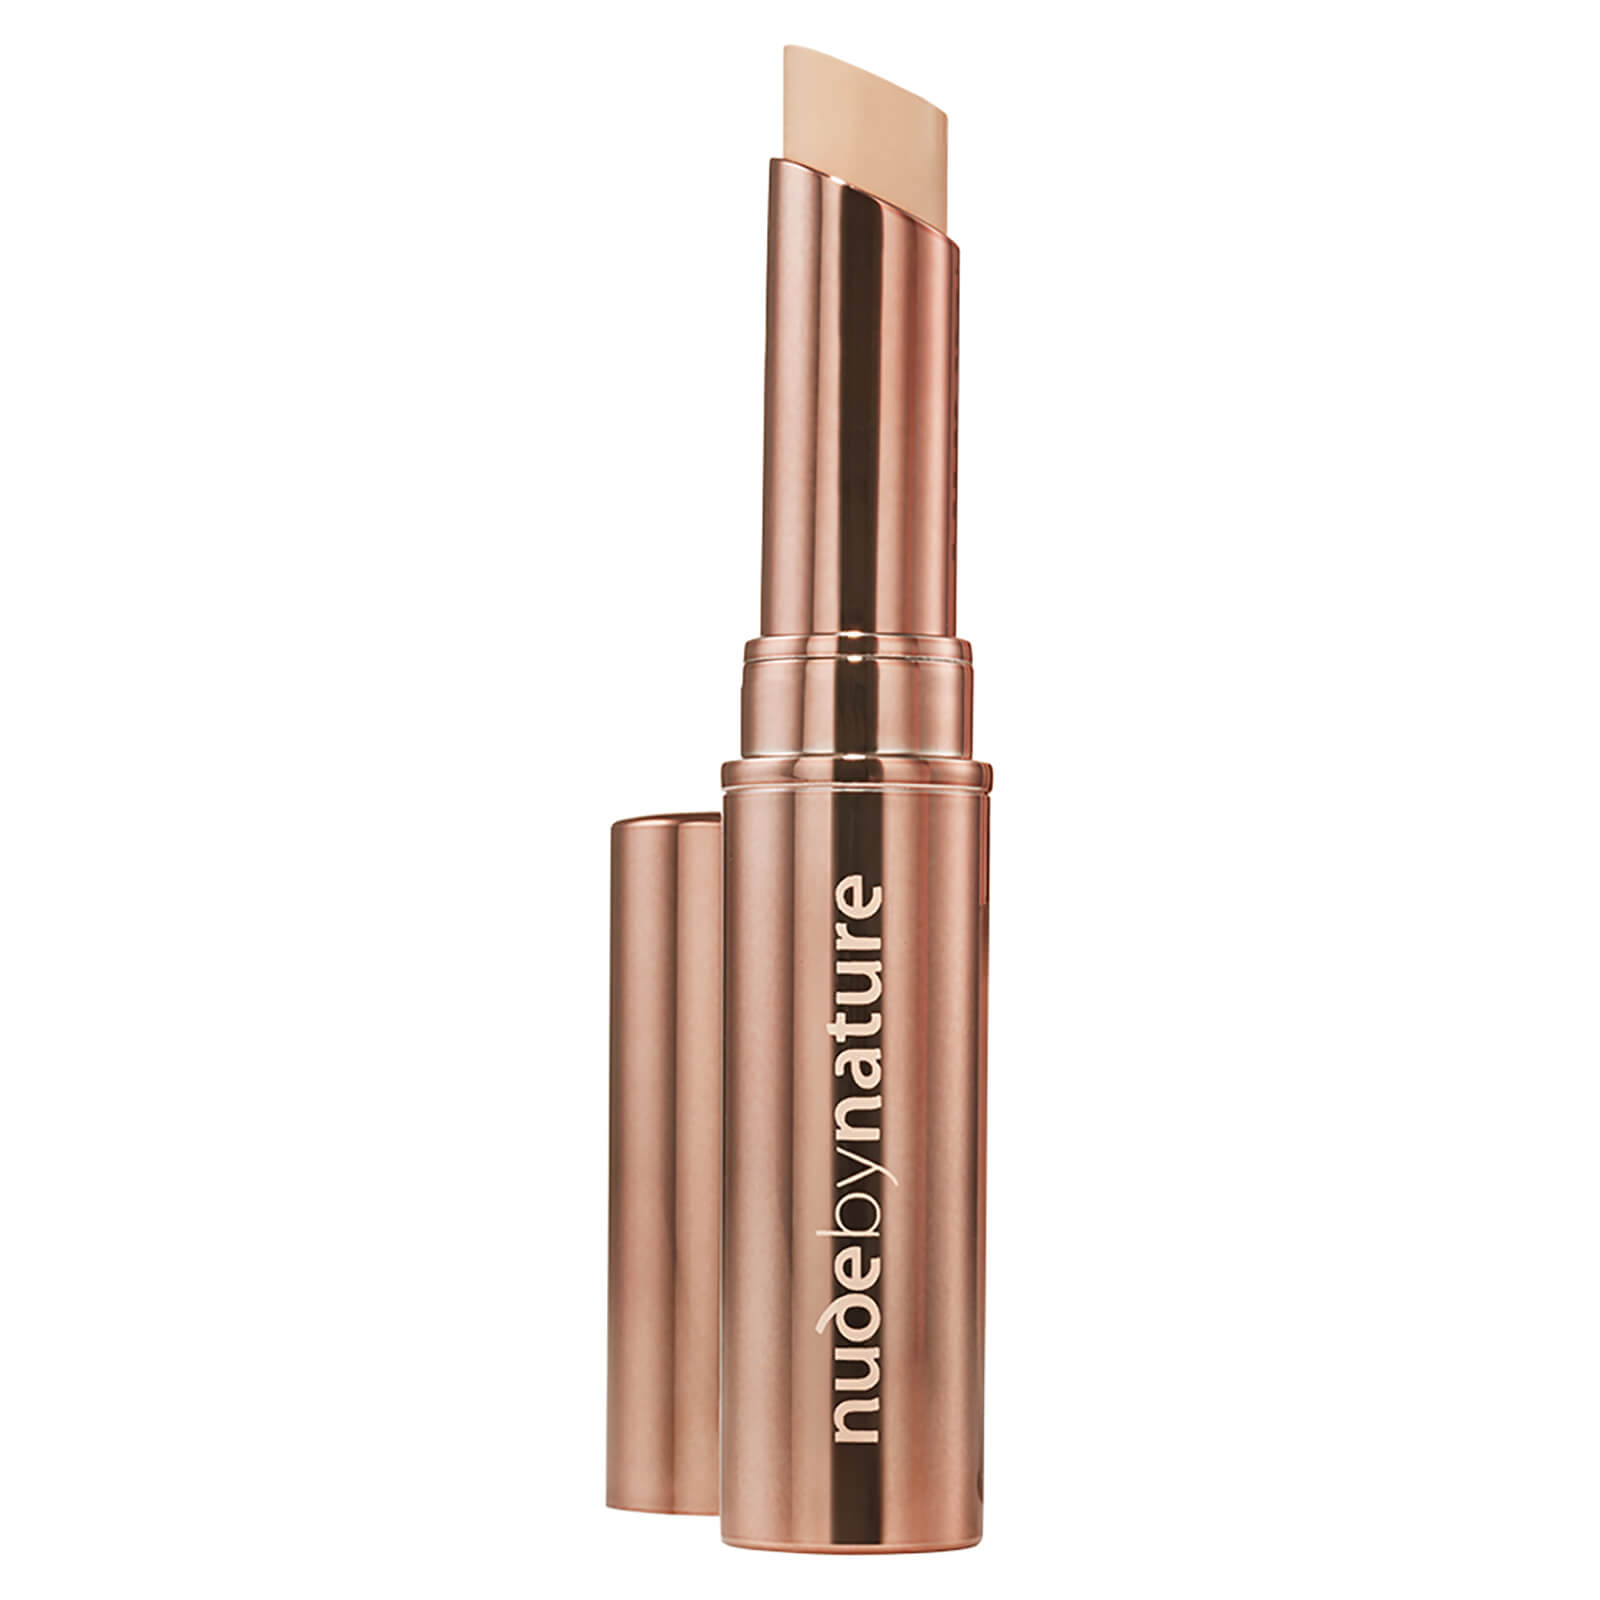 nude by nature Flawless Concealer 2.5g (Various Shades) - 02 Porcelain Beige